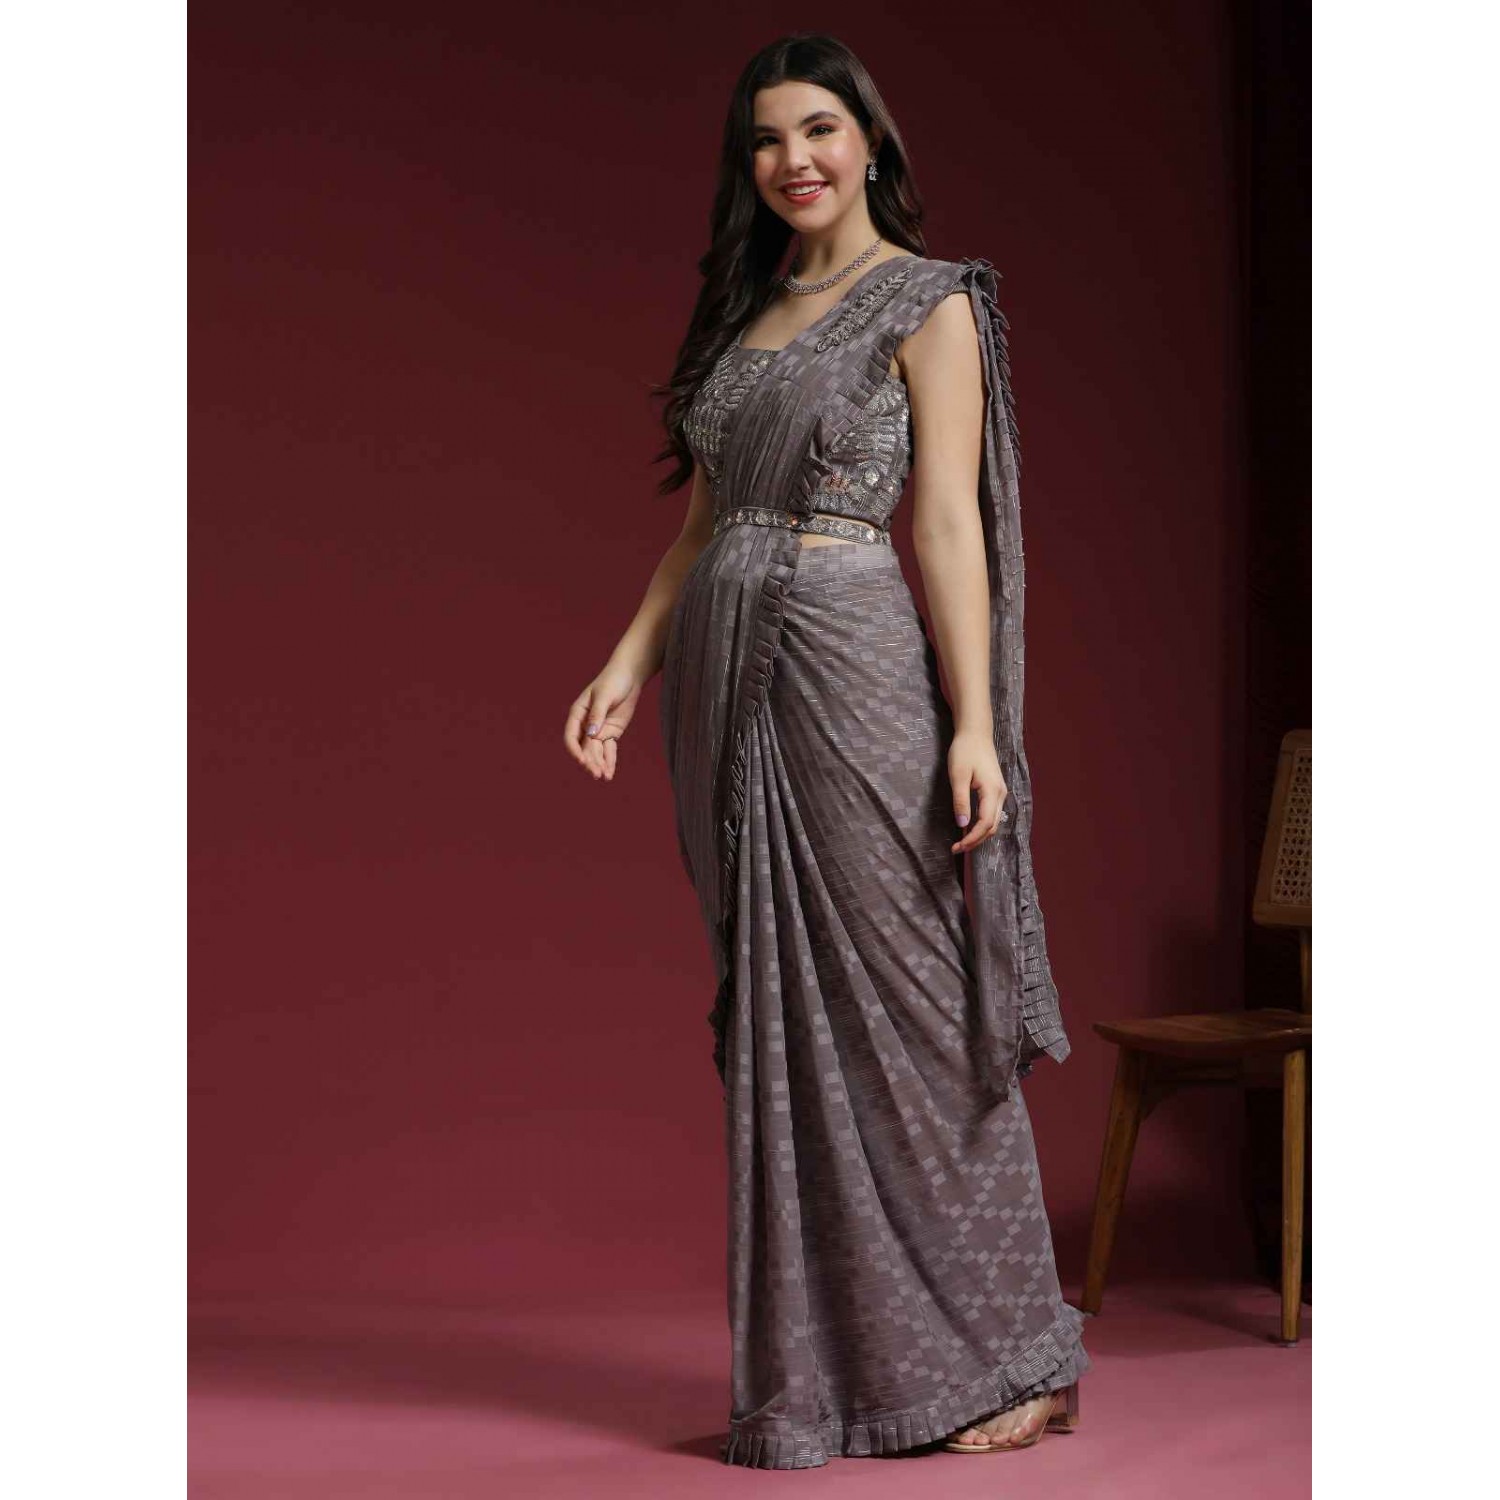 Amoha 275-D Sequence Designer Ready To Wear Saree Catalog Supplier